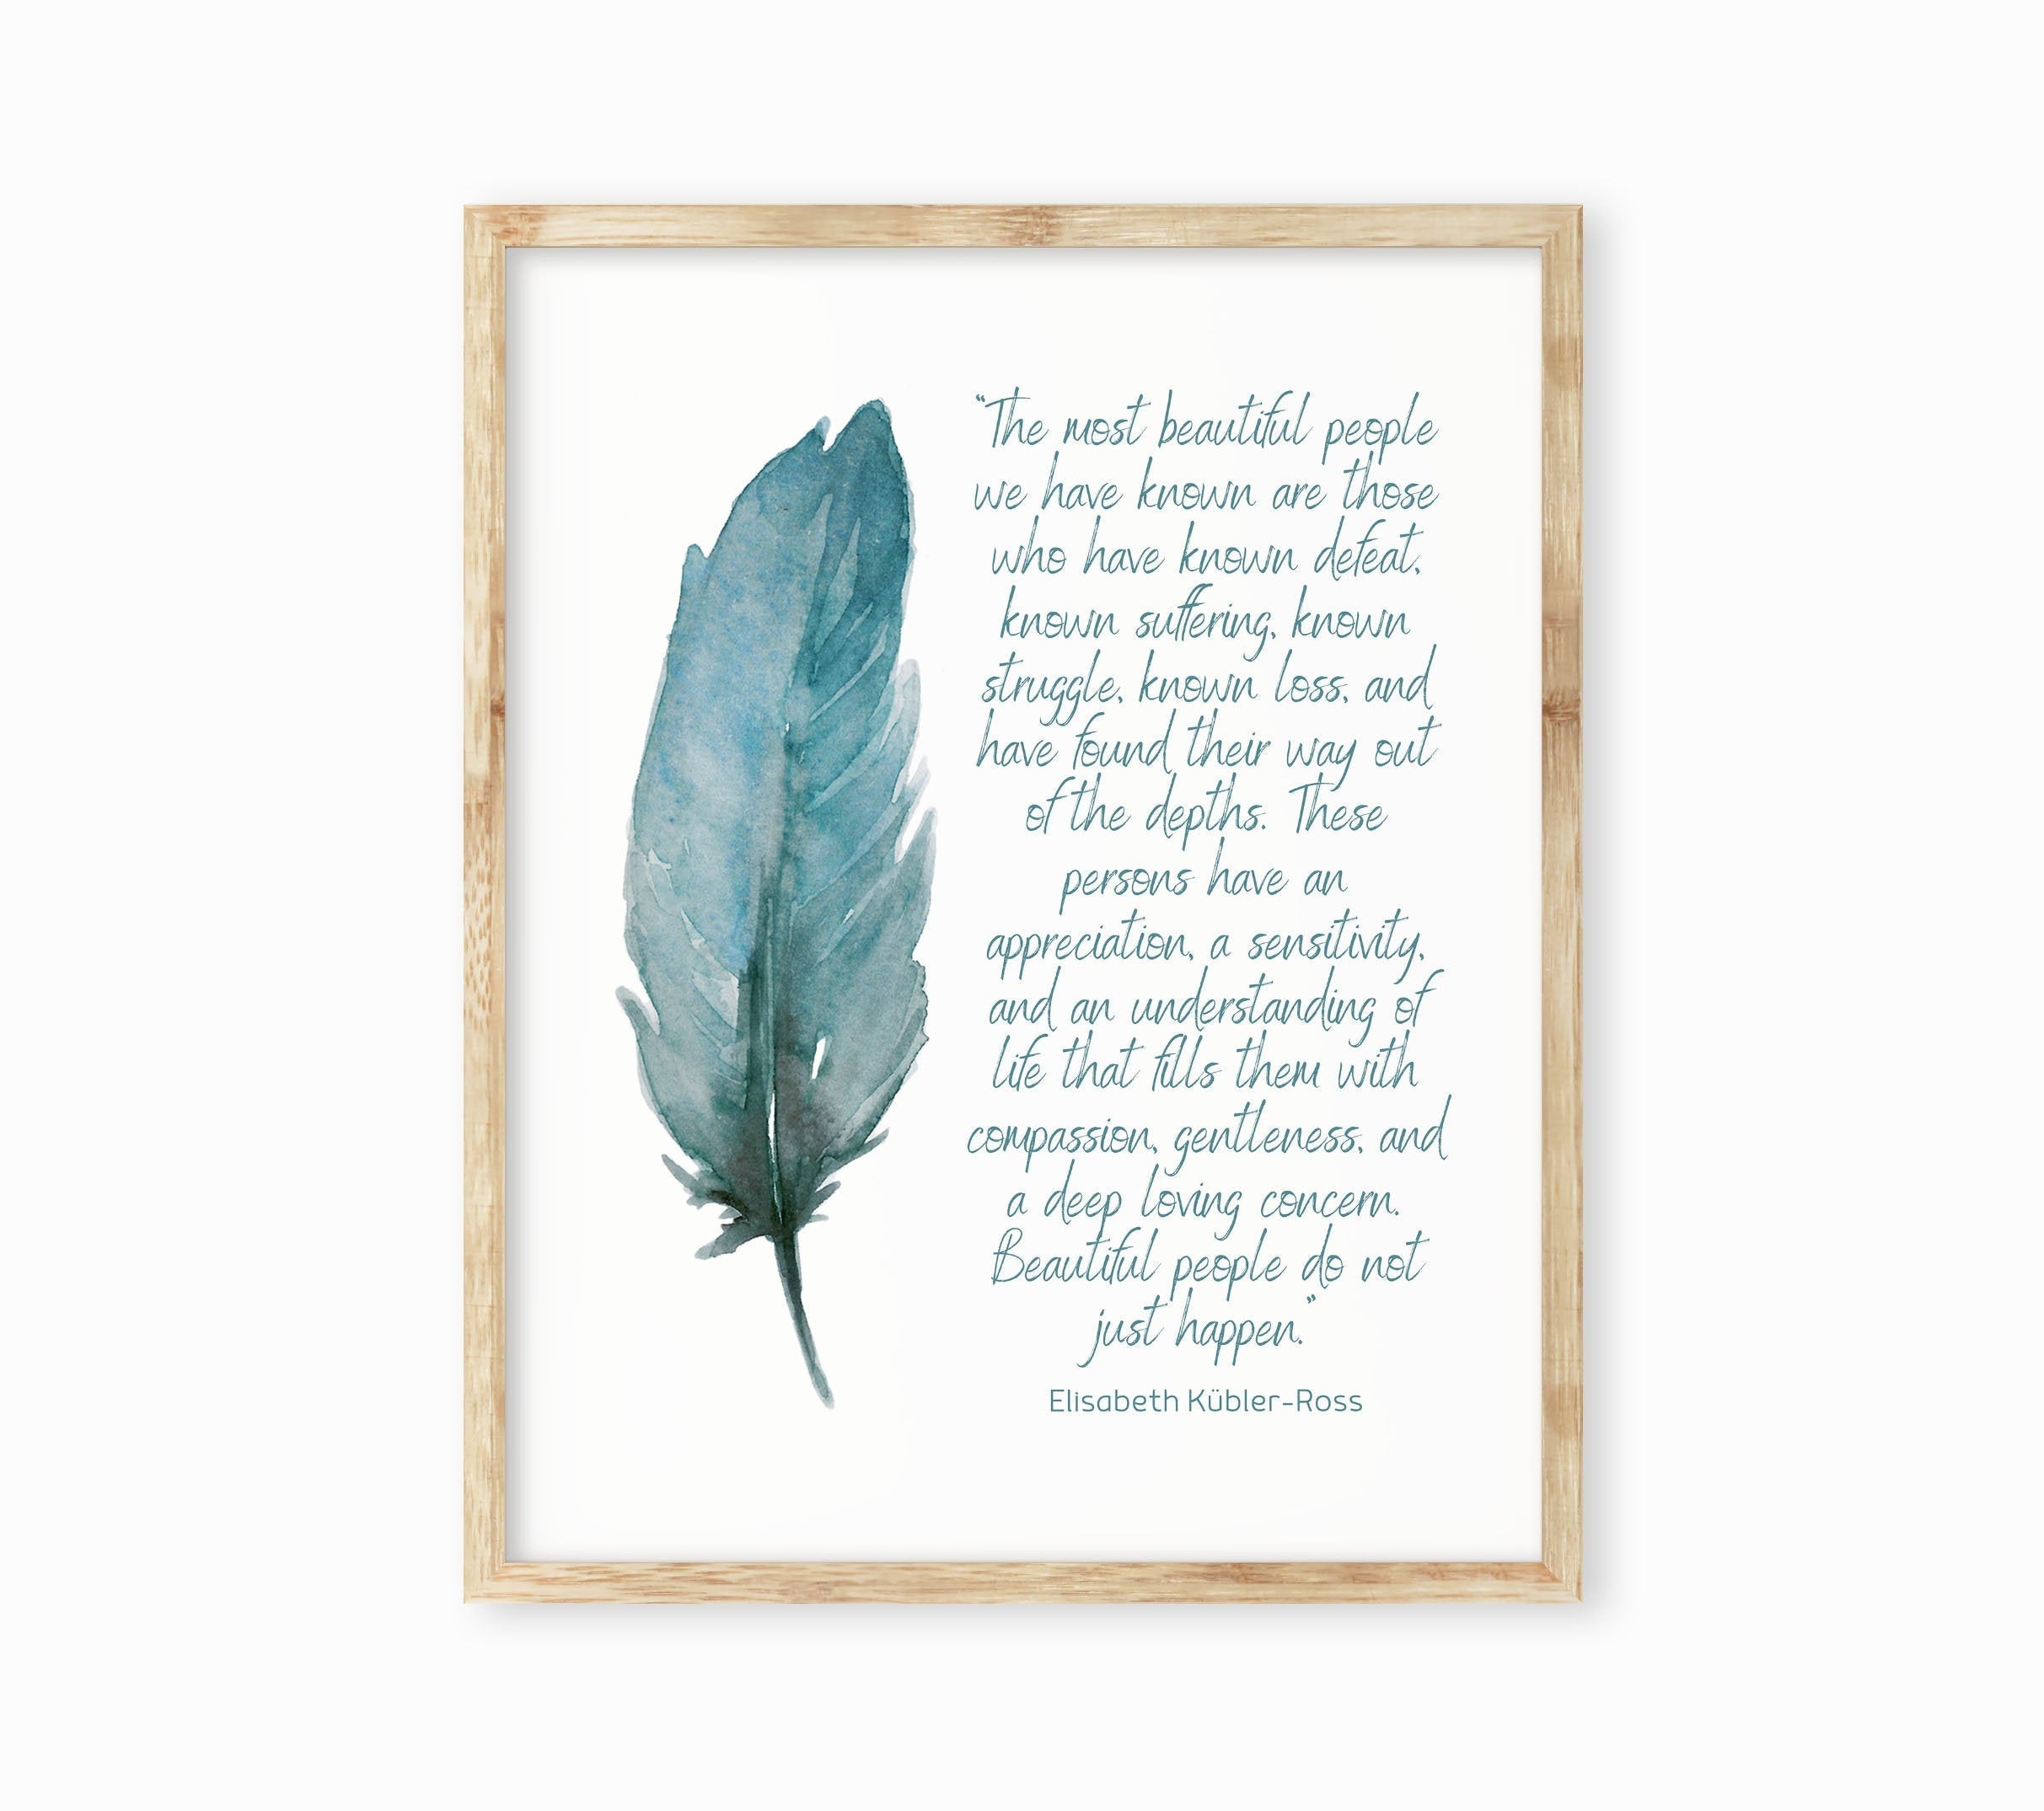 Inspirational Wall Art Prints Most Beautiful People Elisabeth Kubler-Ross Quote, Teal Feather Watercolor Print